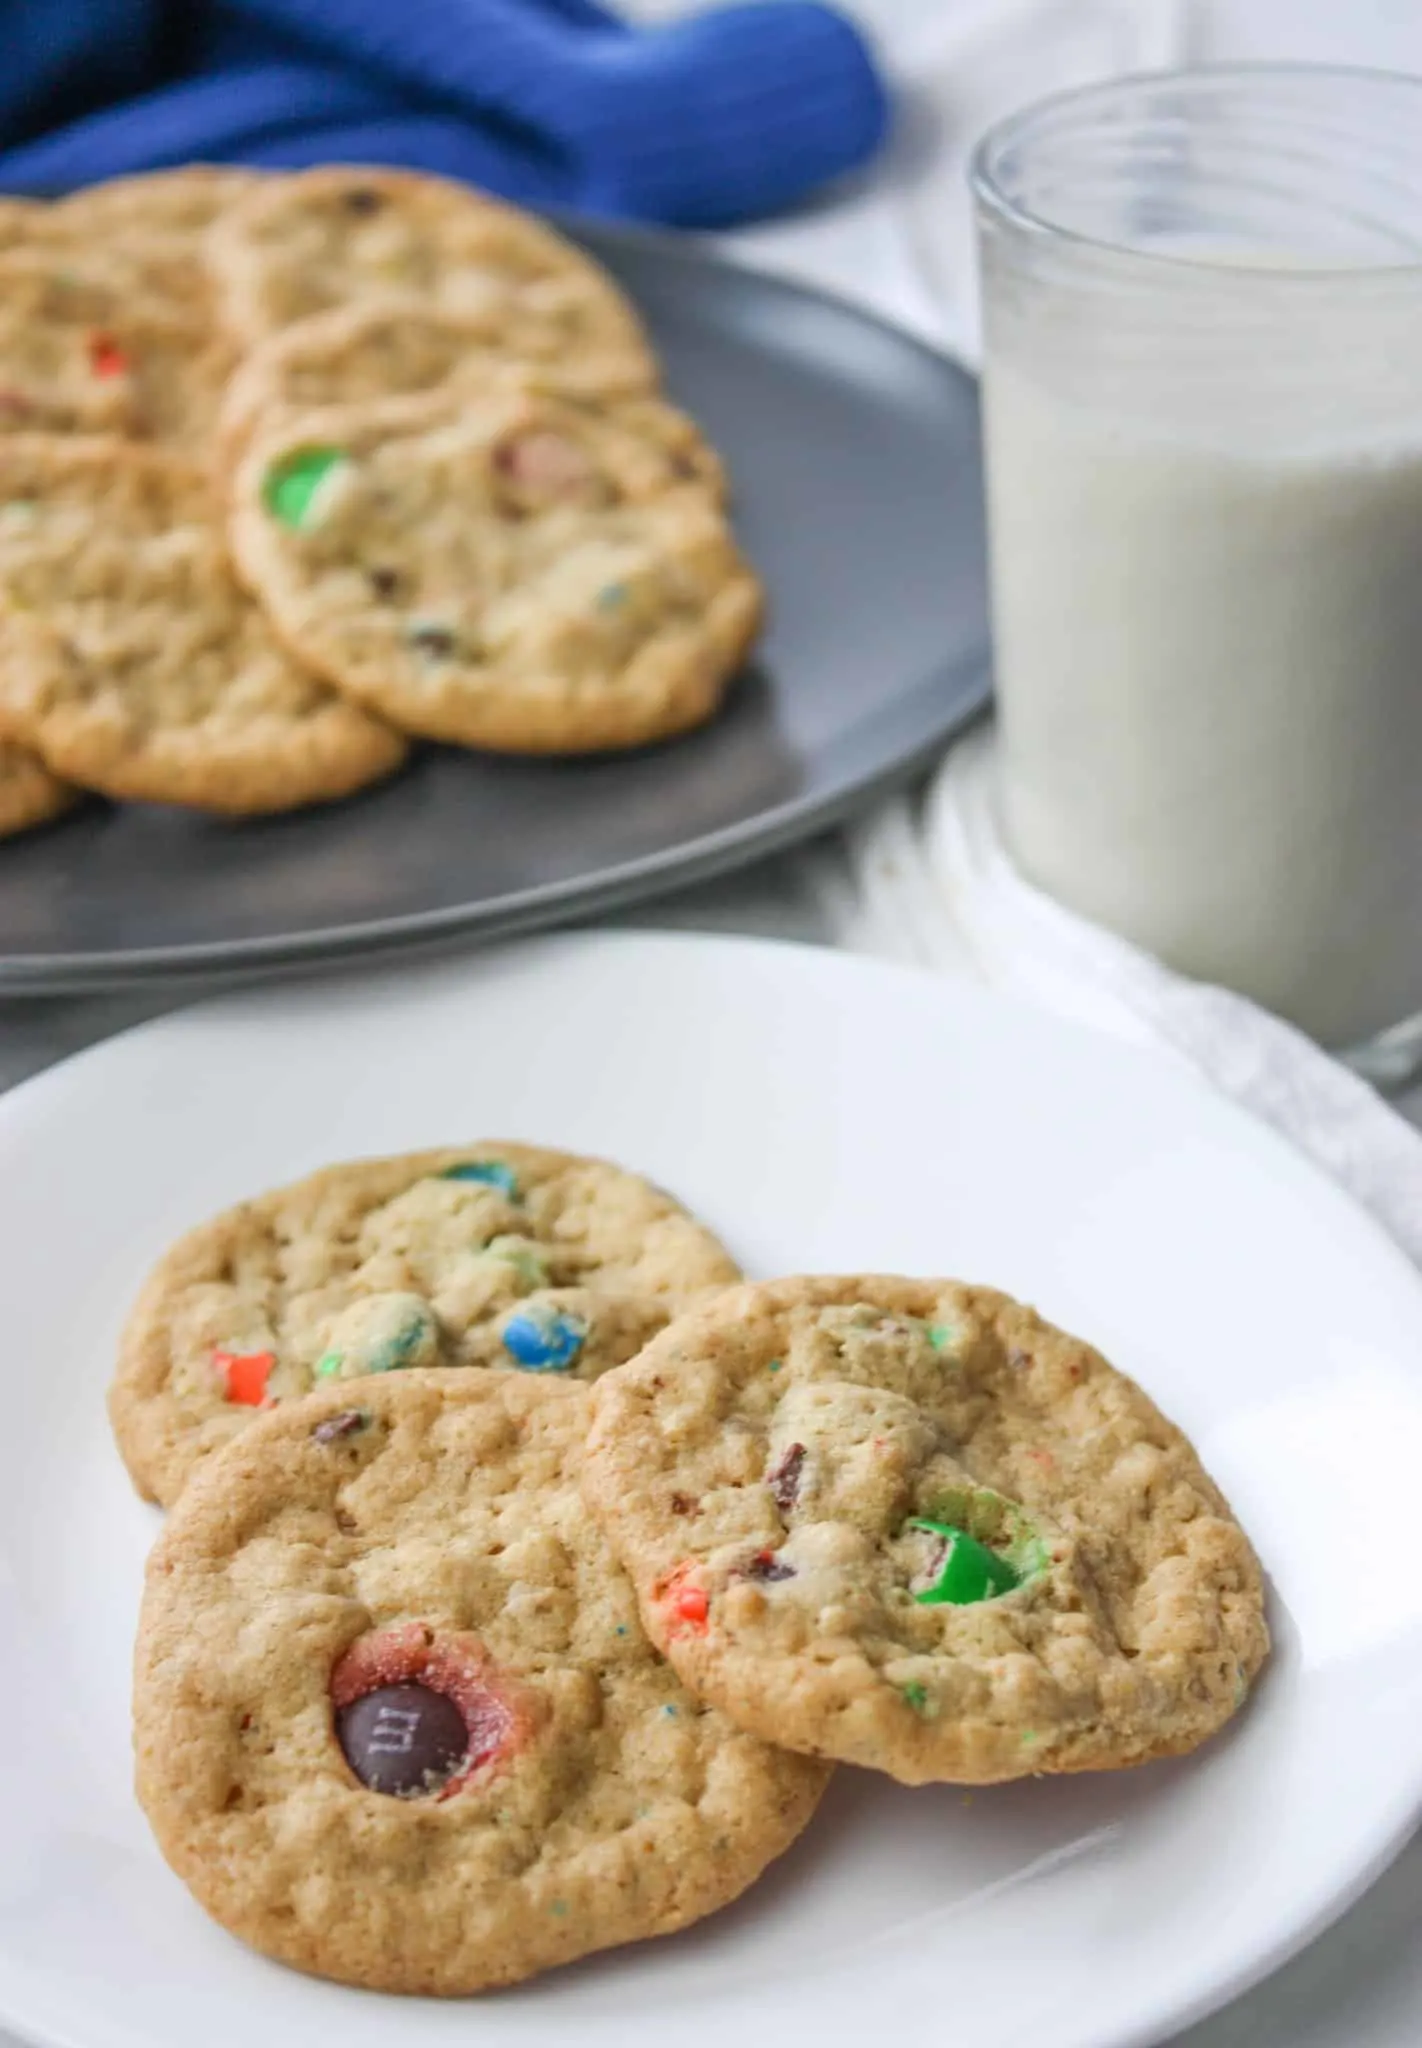 Gluten Free Monster Cookies are a tasty combination of peanut butter and oatmeal.